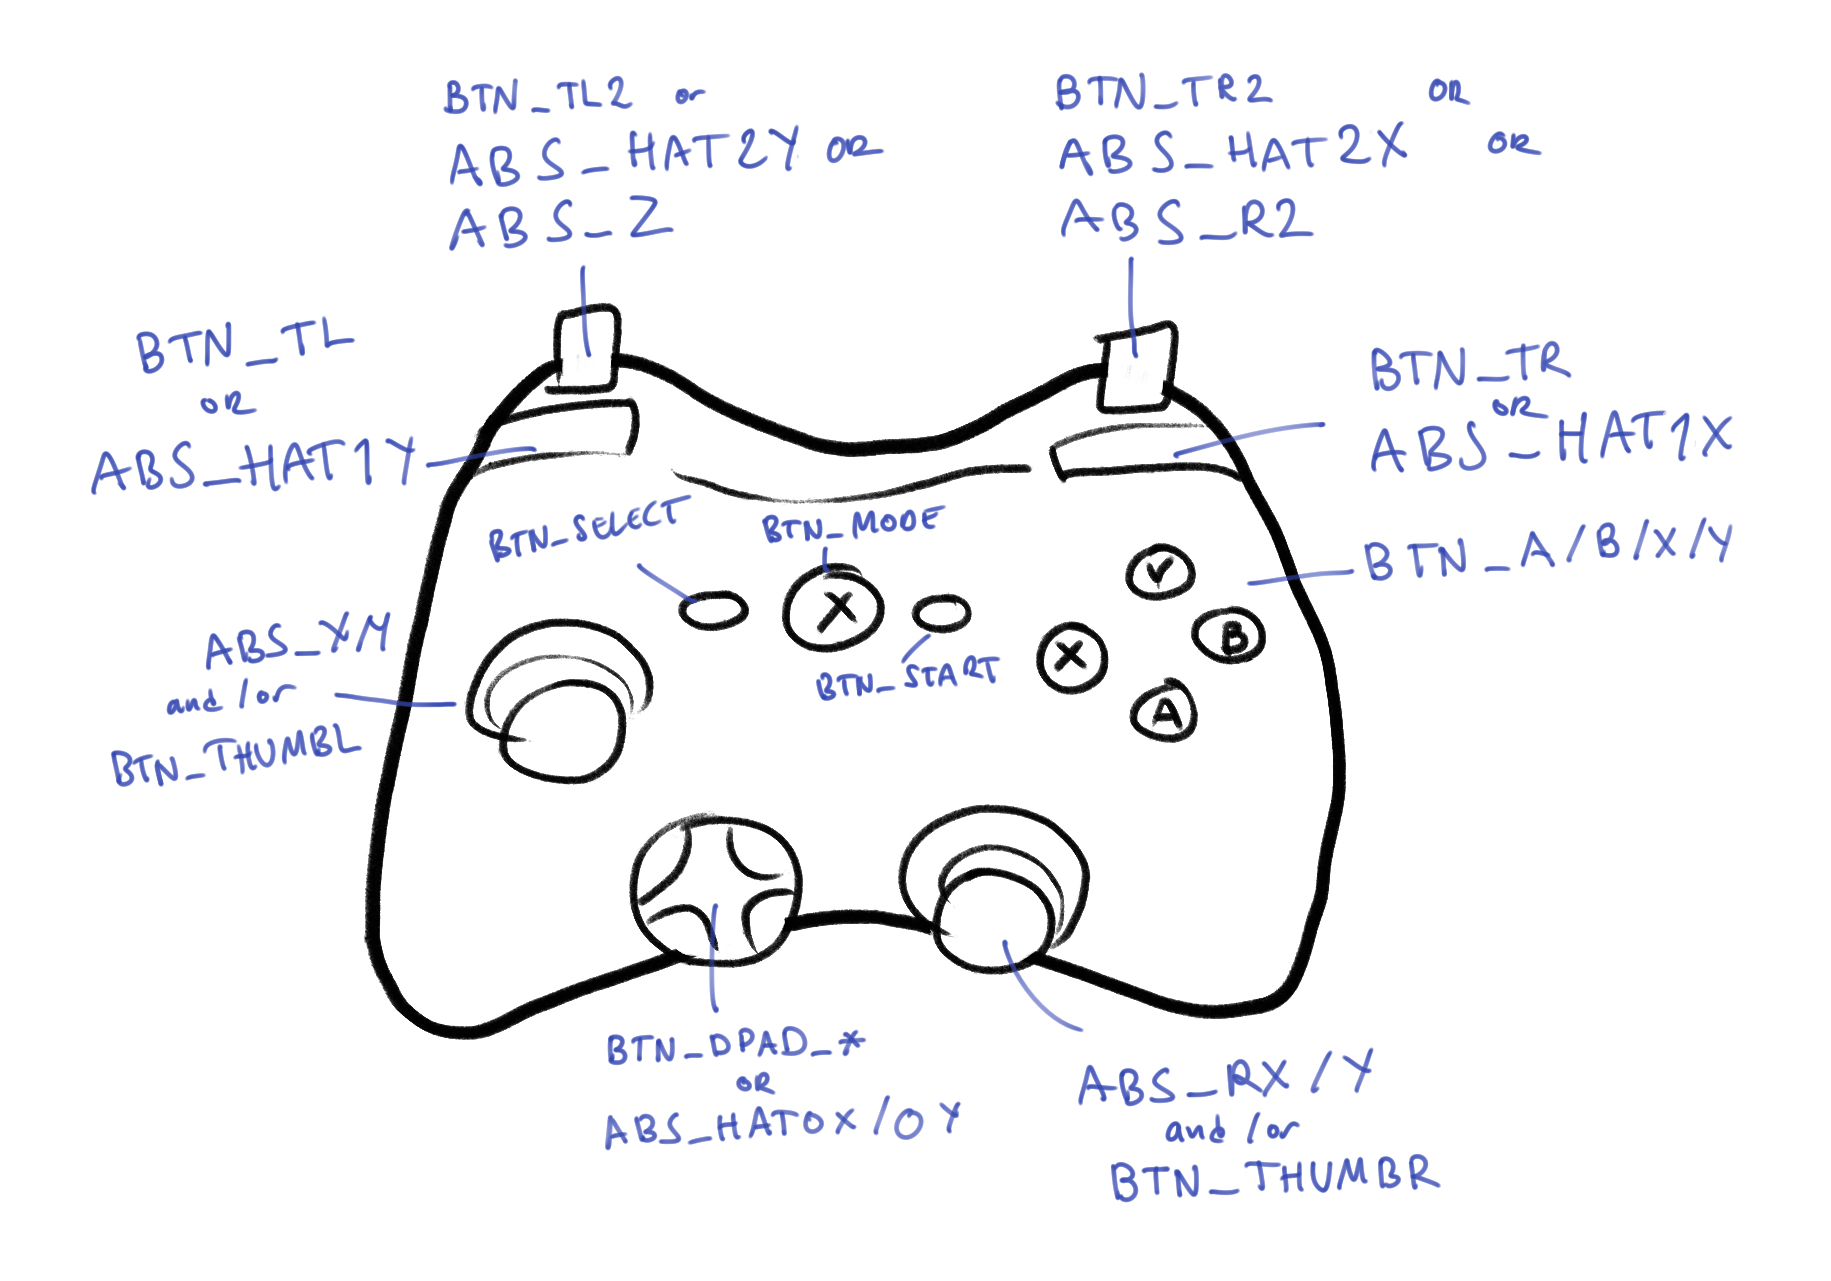 Gamepad Implementation on Linux